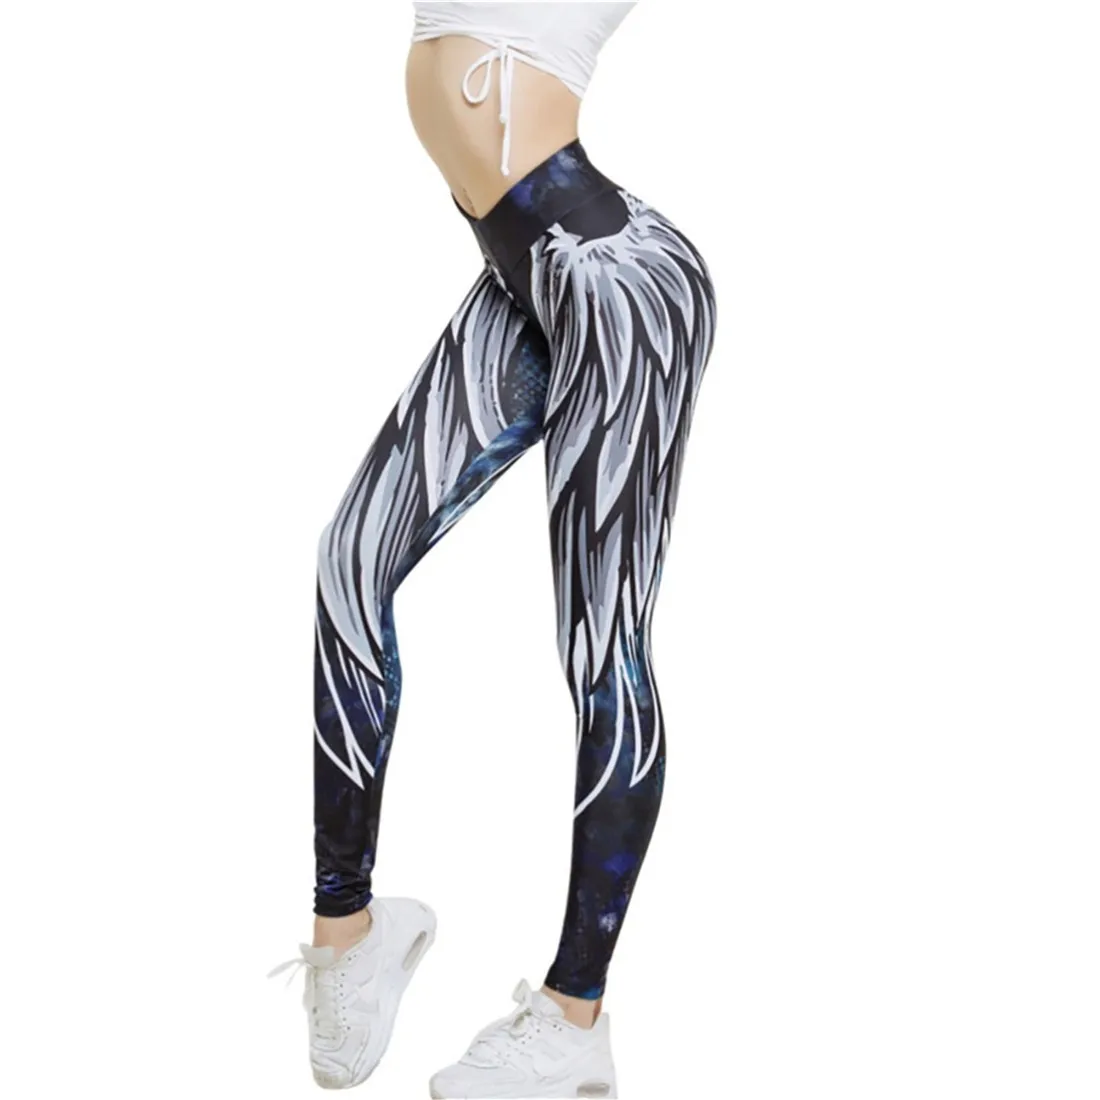 Harajuku 3D wing leggings for women 2018 push up sporting fitness legging athleisure bodybuilding sexy women's pants 1